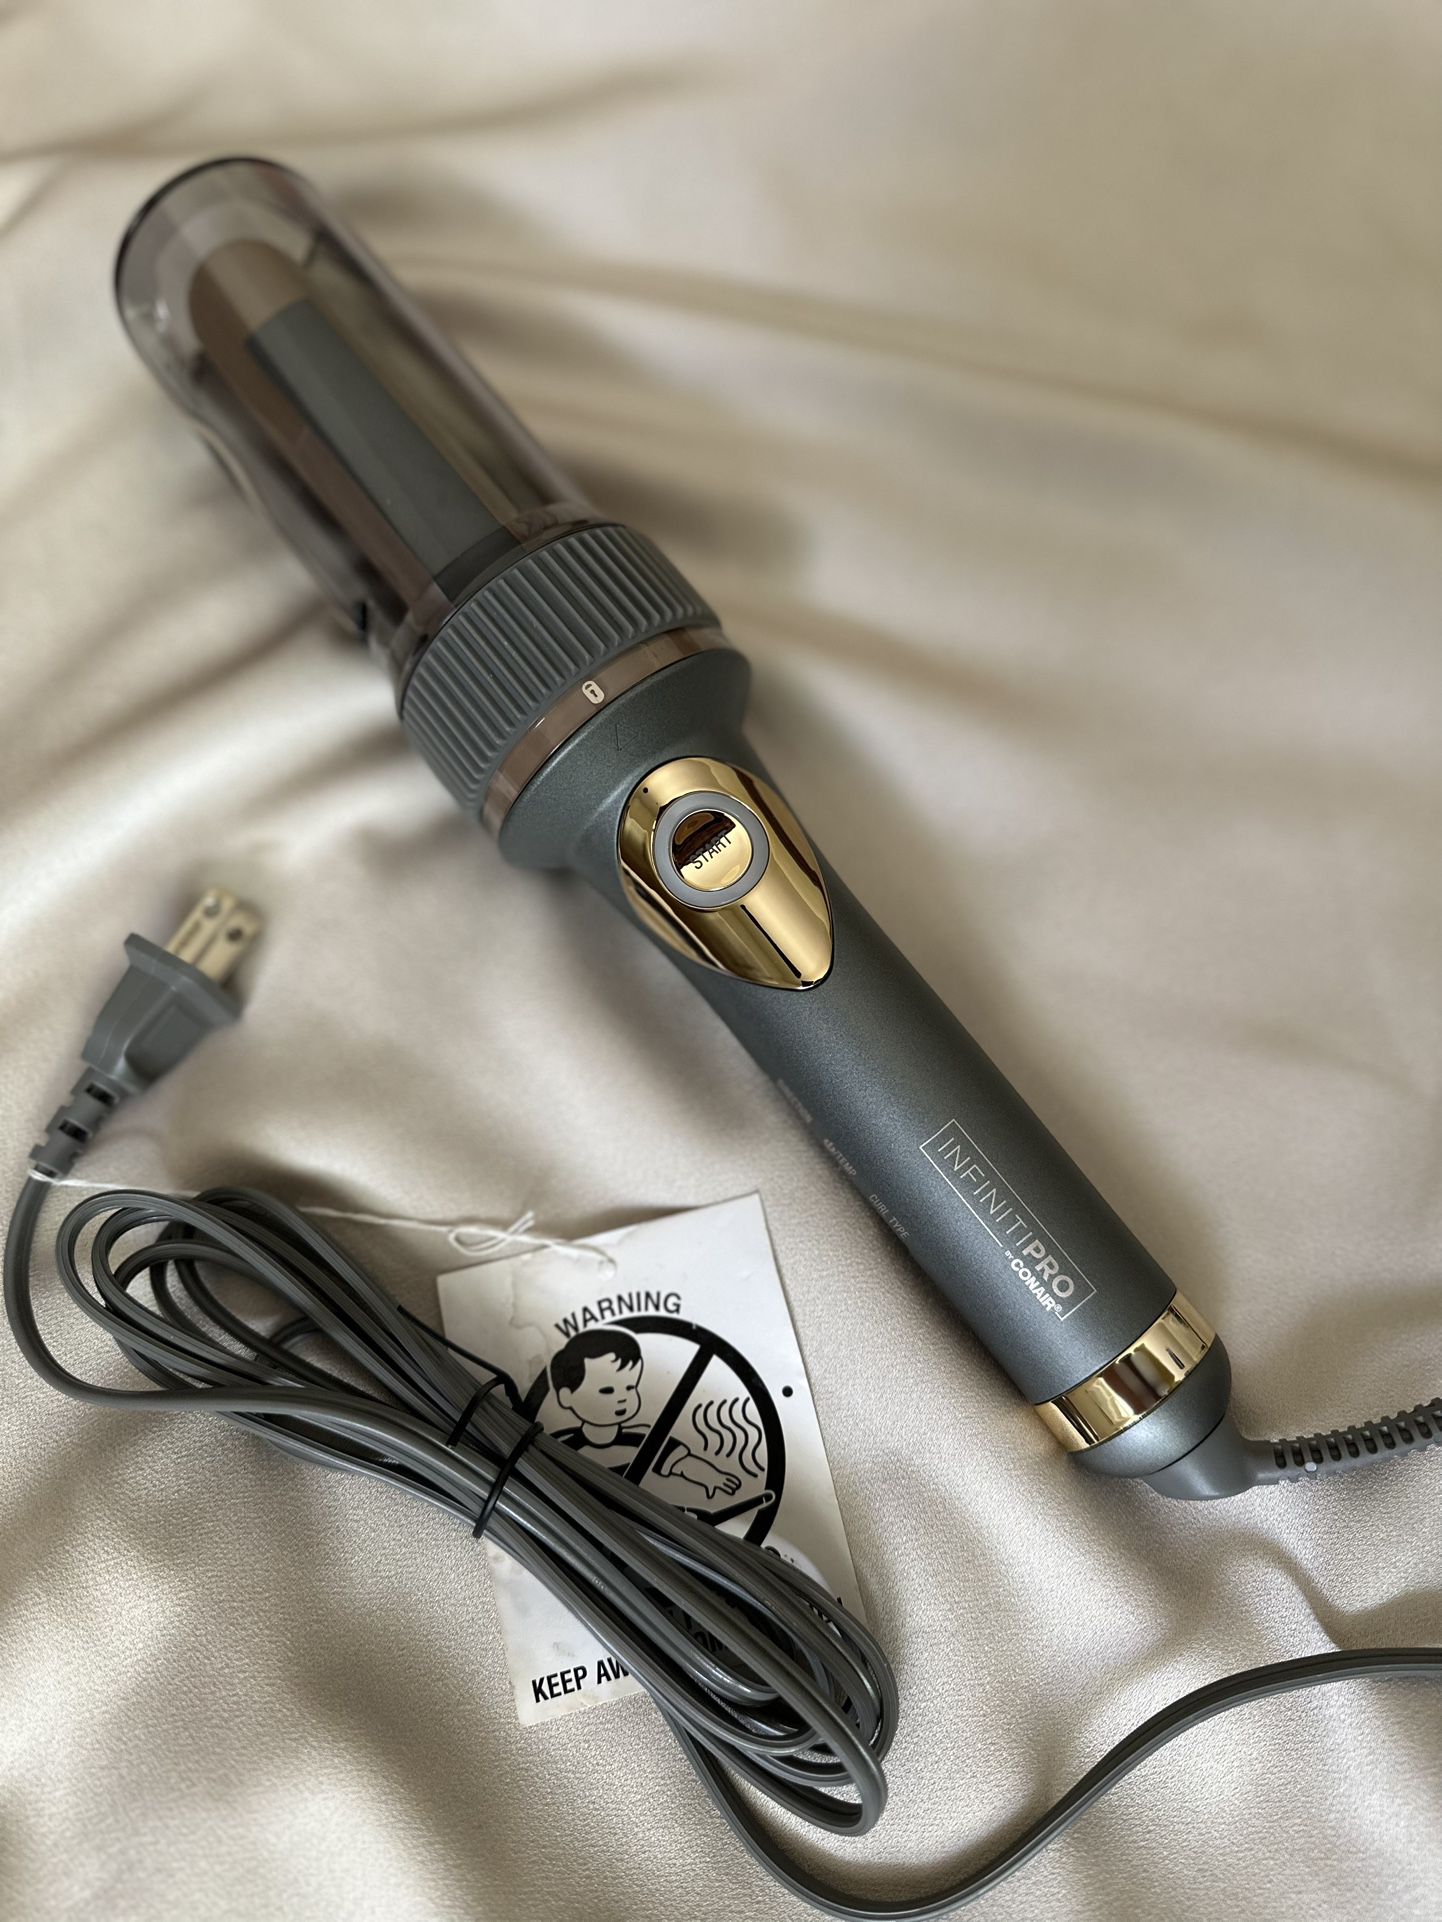 InfinitiPro By Conair Curler